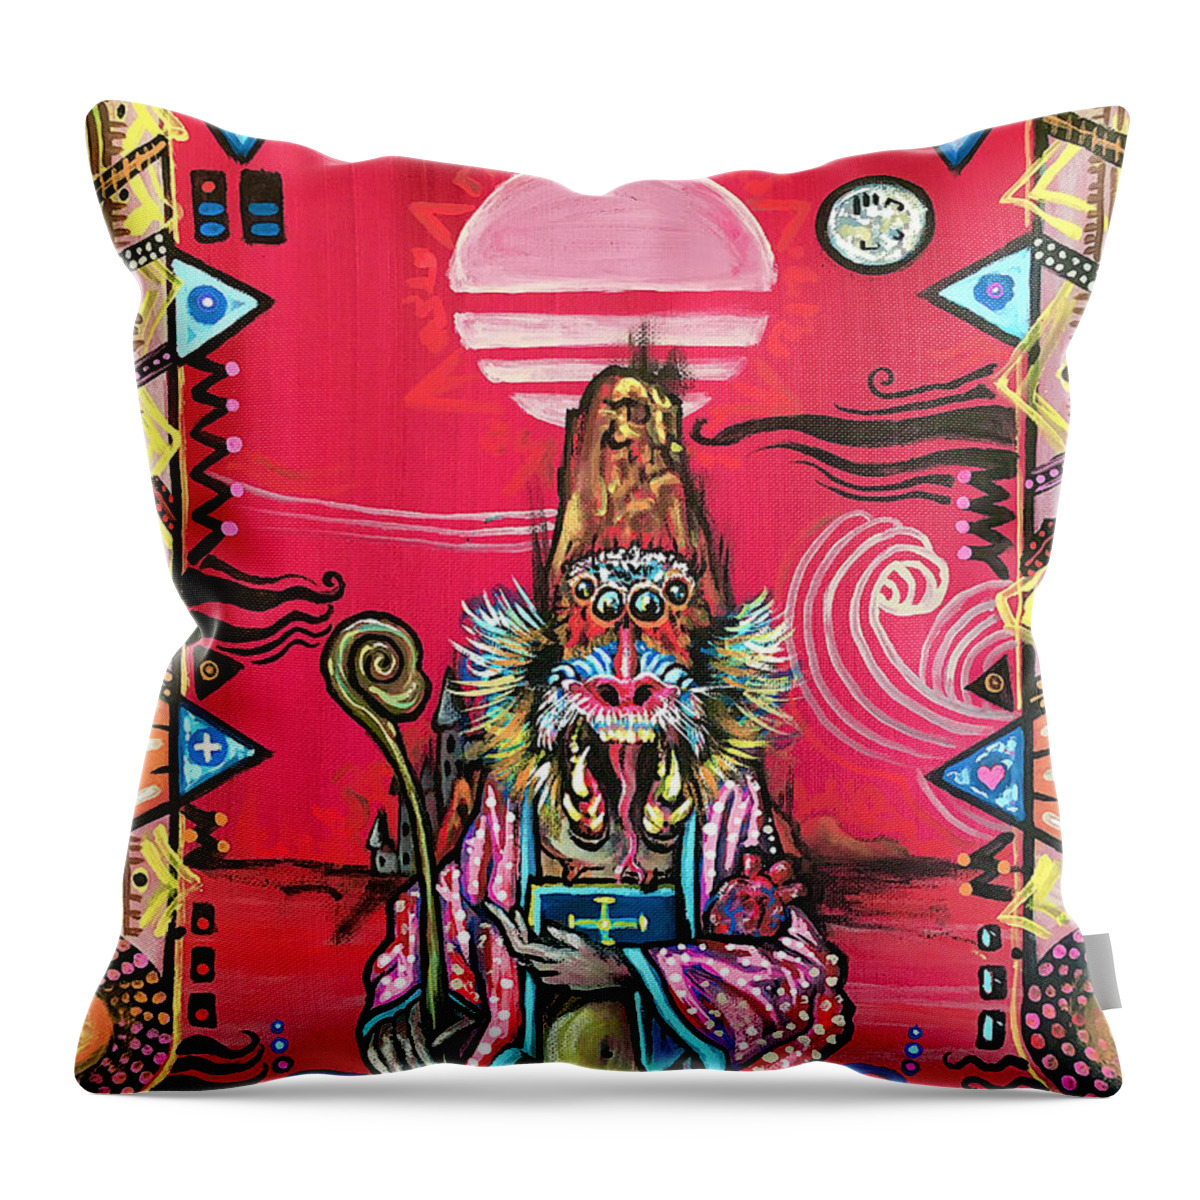 Baboon Throw Pillow featuring the painting Dennis by Jacob Wayne Bryner